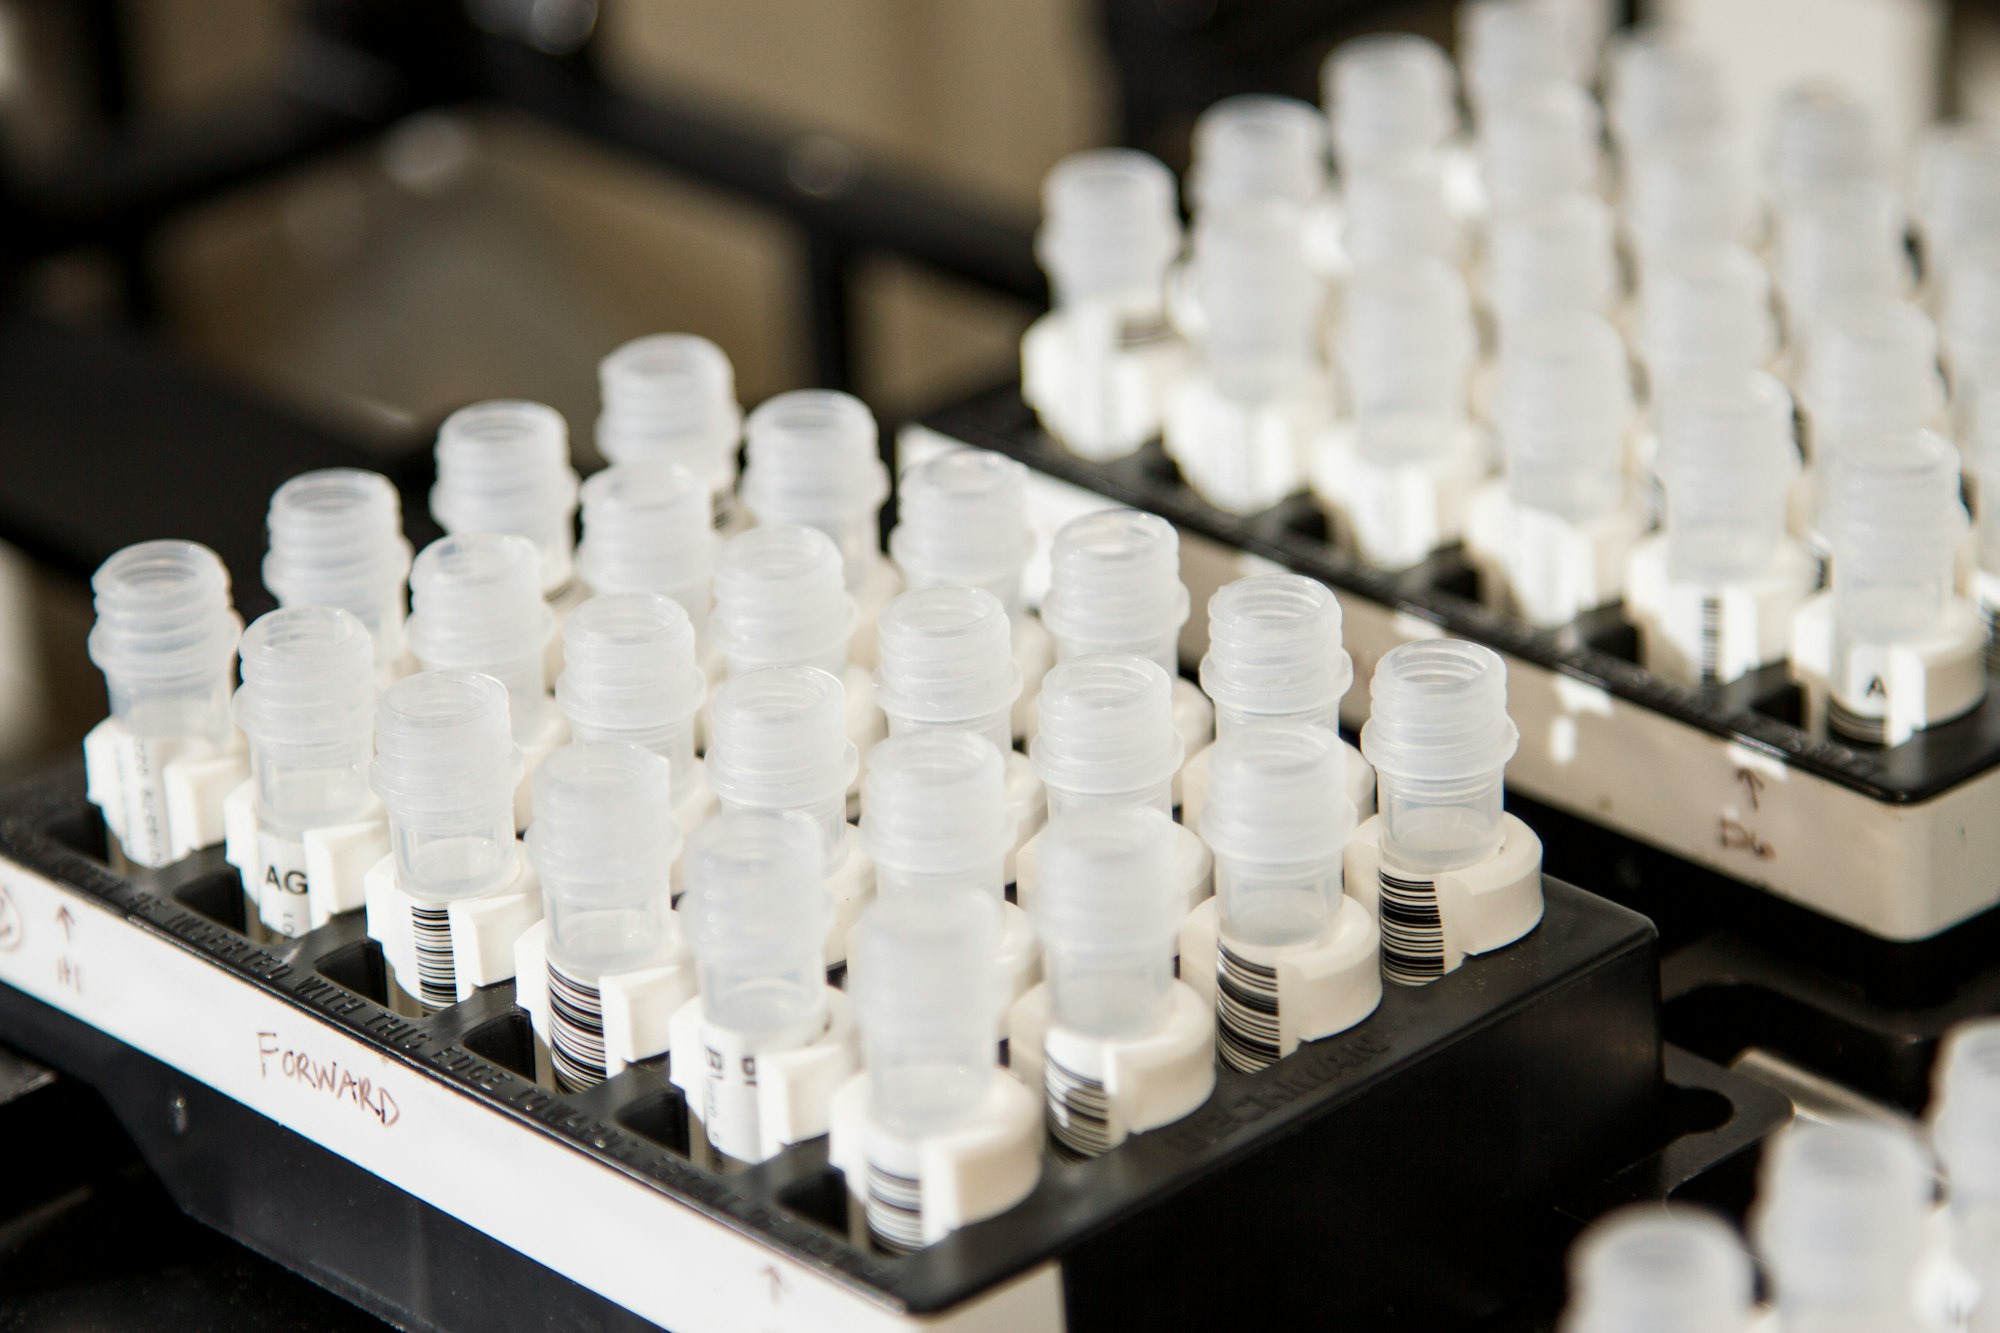 DNA Genotyping and Sequencing. Vials containing DNA samples from studies of the genetic risk for cancer at the Cancer Genomics Research Laboratory, part of the National Cancer Institute's Division of Cancer Epidemiology and Genetics (DCEG).